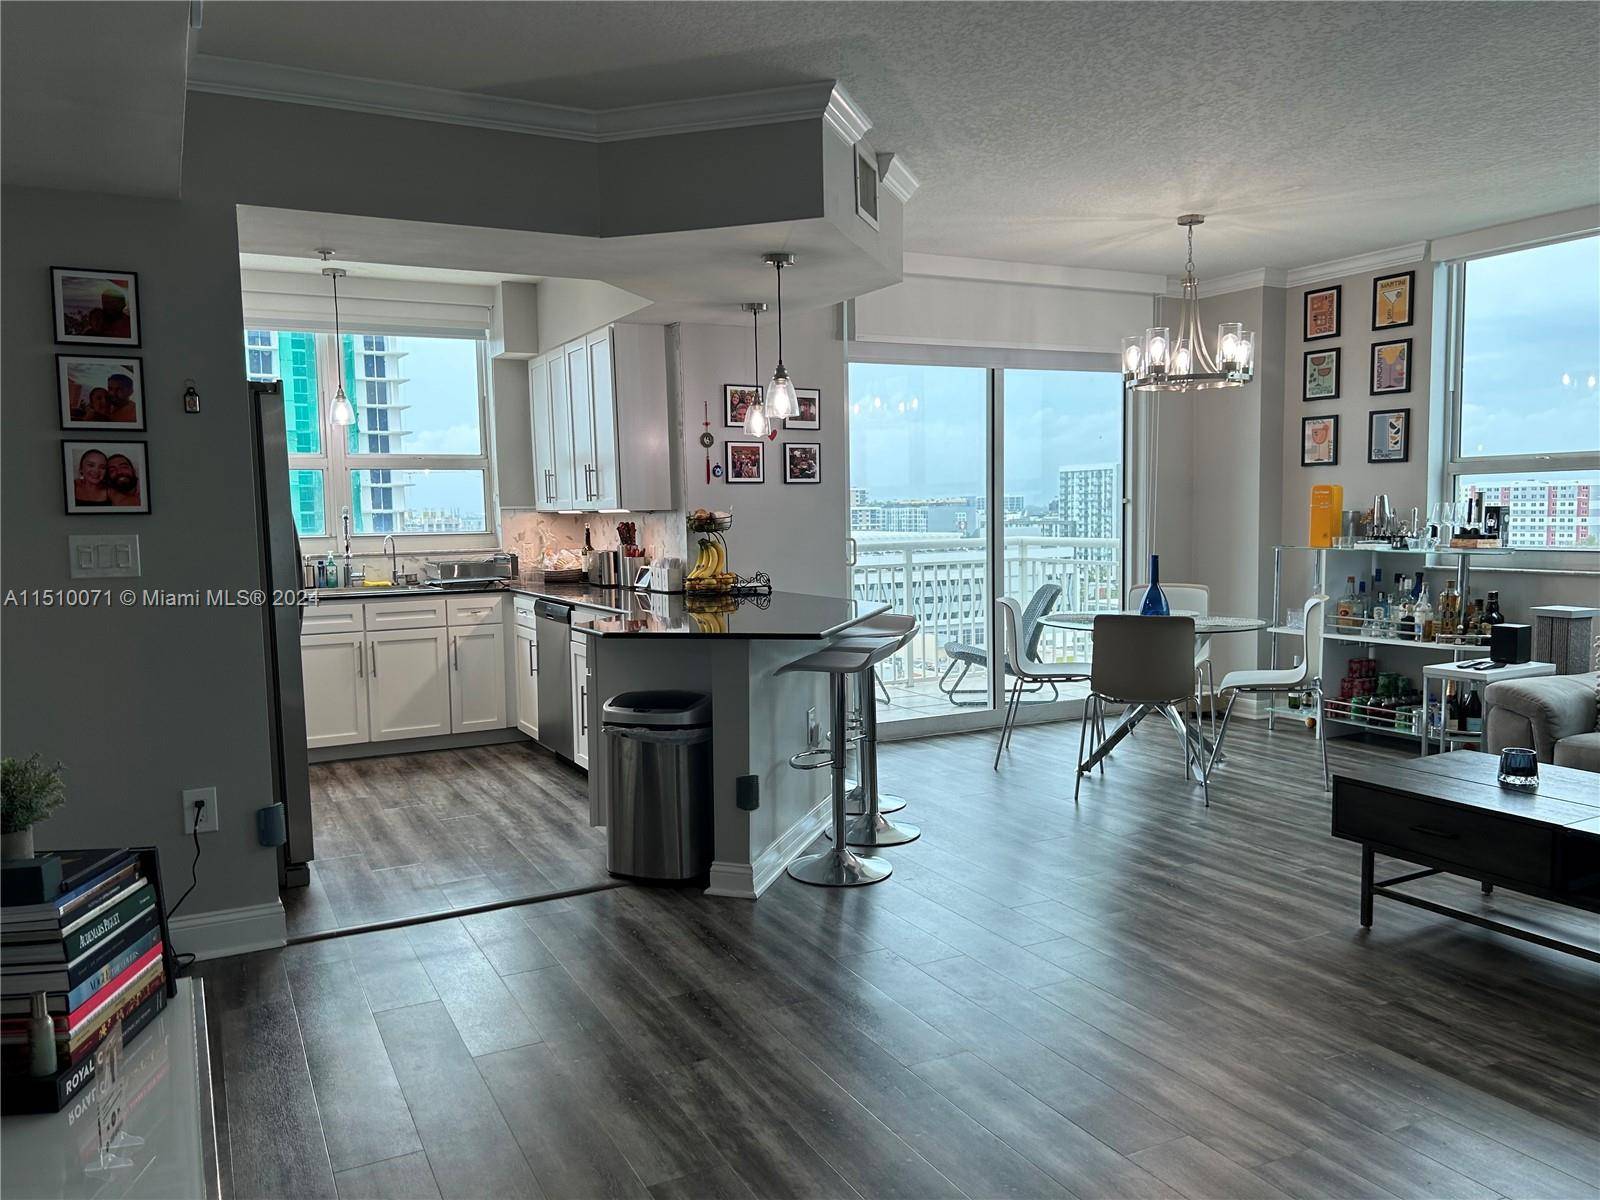 Great opportunity to own this stunning 2 bedroom 2 bath, corner unit in the heart of Edgewater.